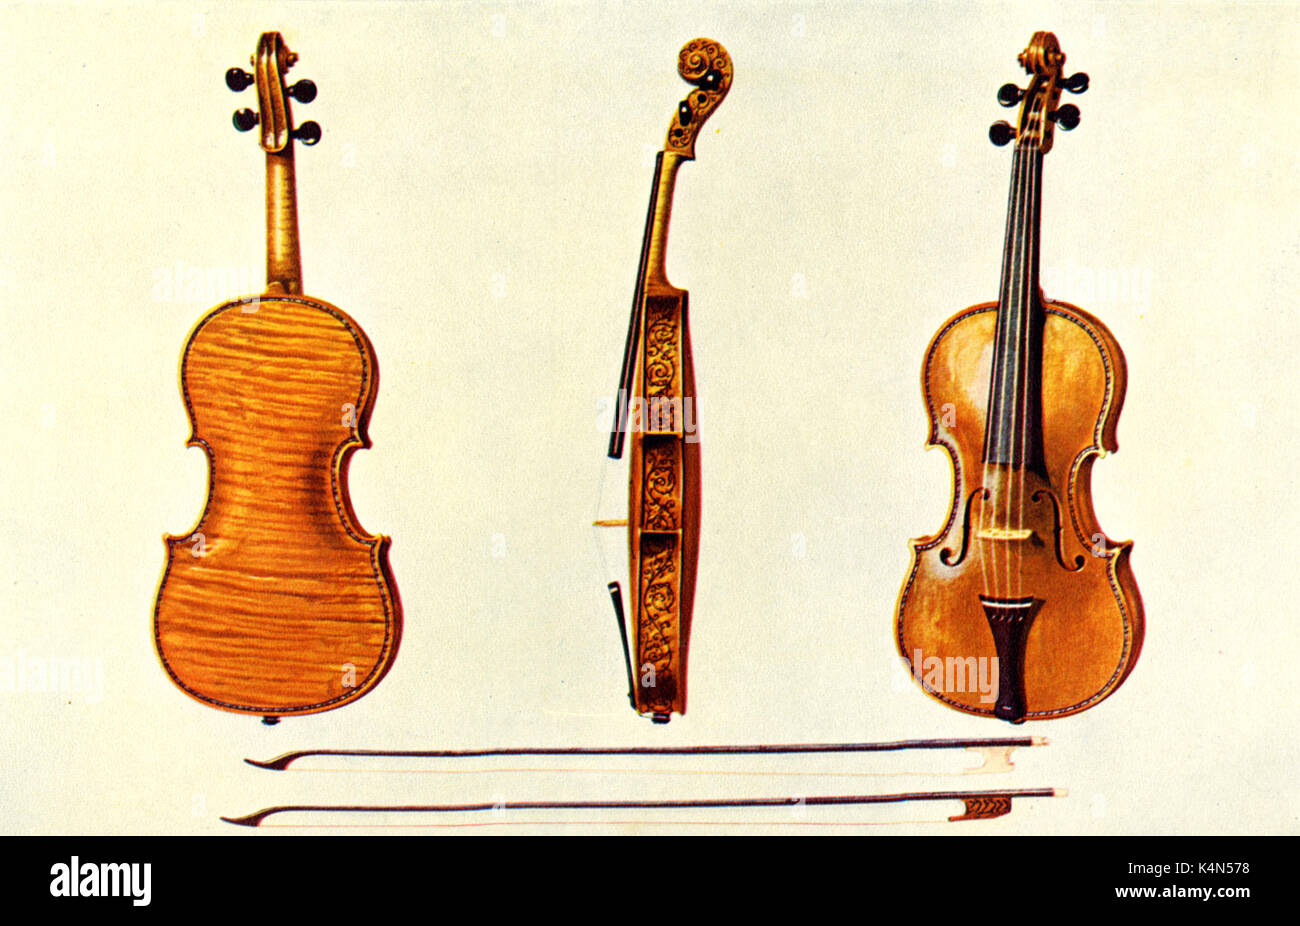 VIOLIN - STRADIVARIUS The 'Hellier' Stradivarius, made 1679, bought by S Hellier, 1734. Front, back and side views. Also bows by F Tourte Drawn 1921 by Hipkins. (Alfred James Hipkins 1826-1903) Stock Photo